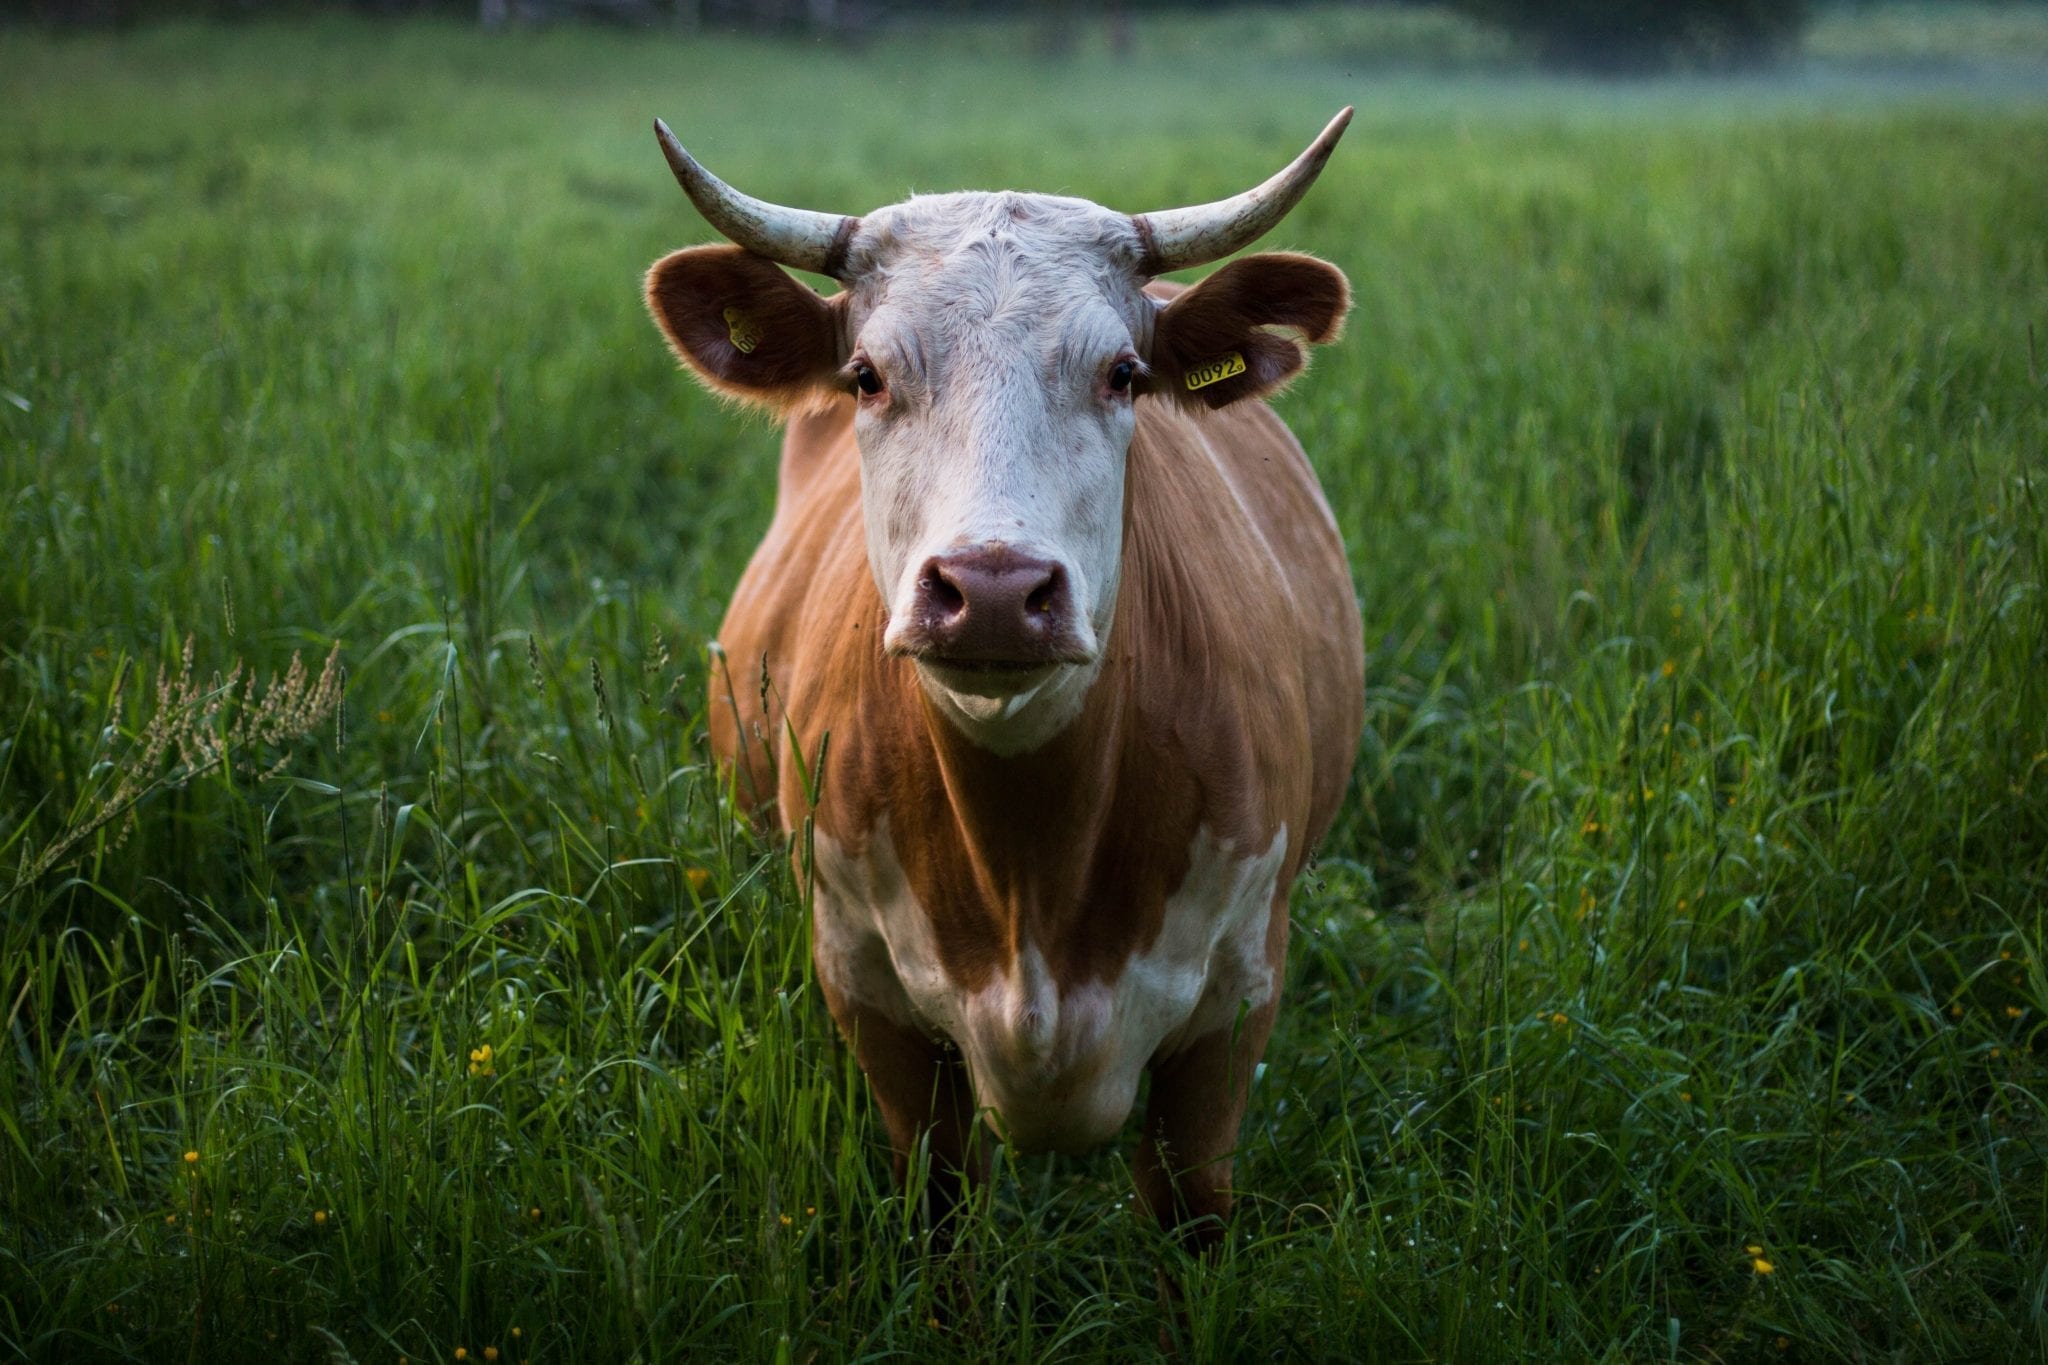 A horned, brown bovine stands in a field of lush green grass.